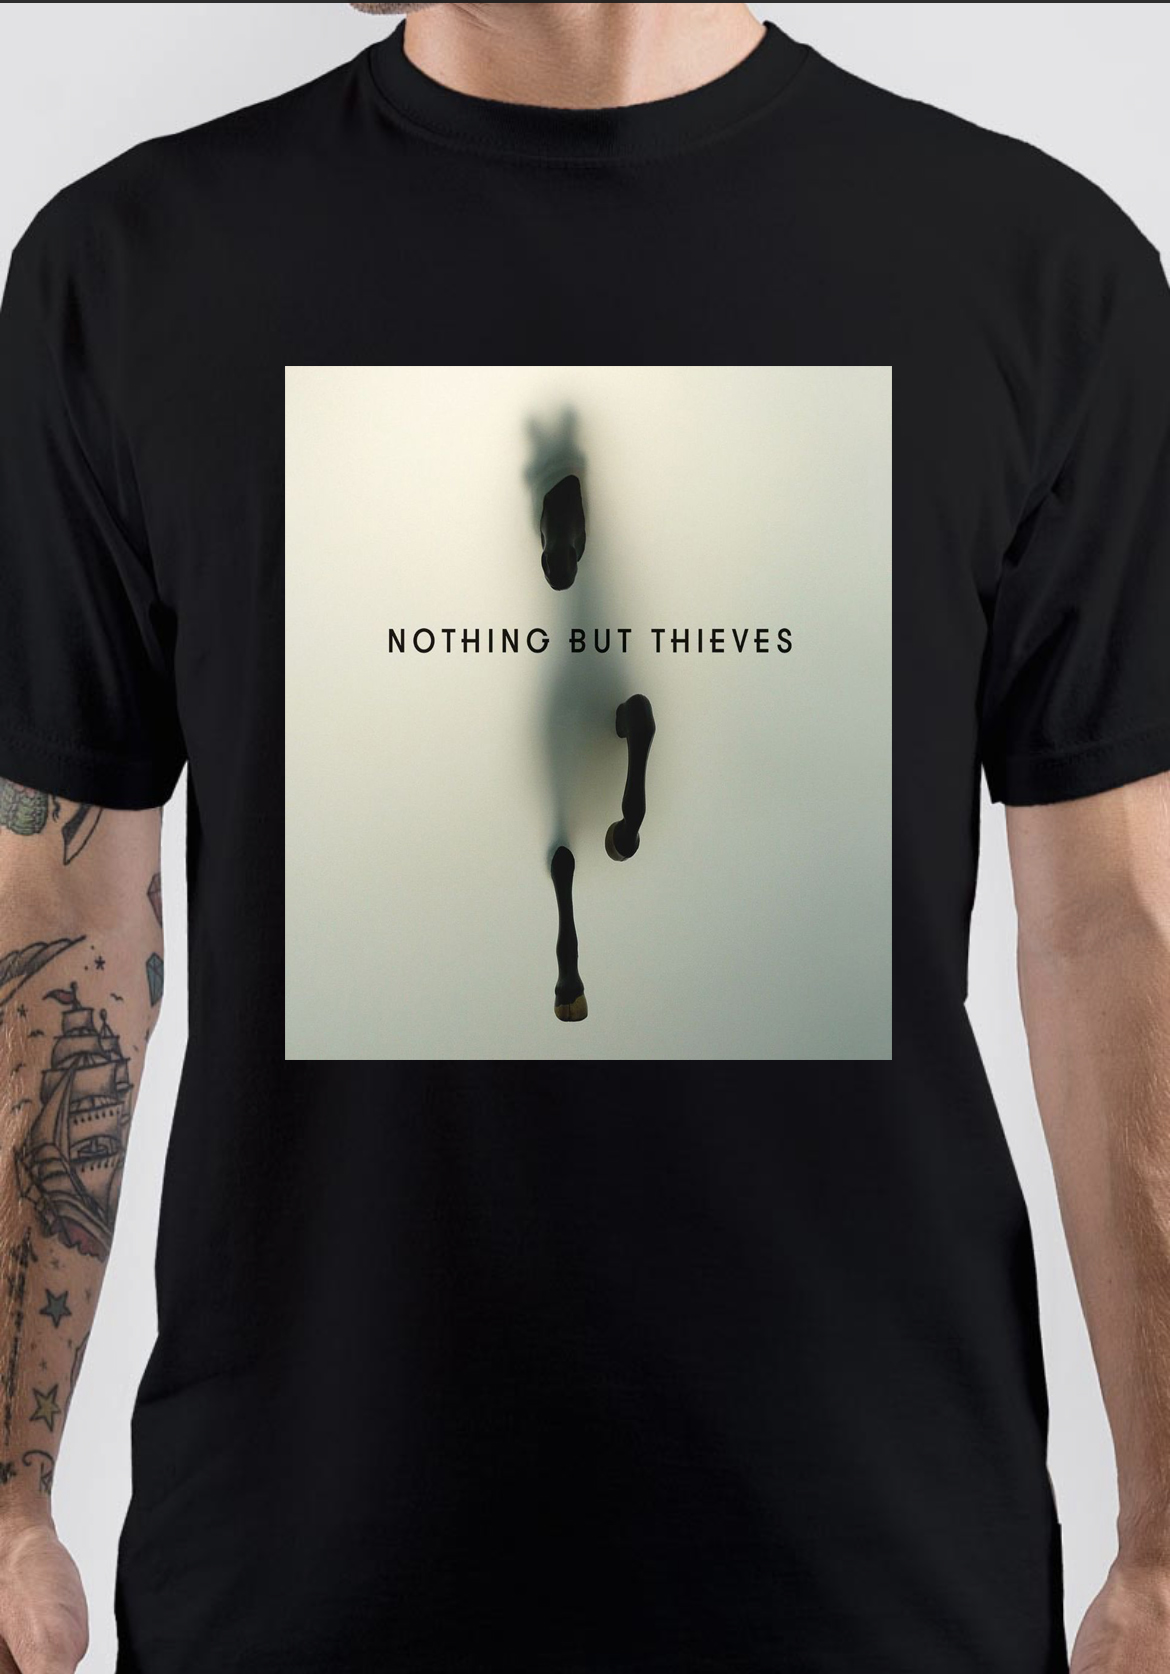 Nothing But Thieves T-Shirt And Merchandise